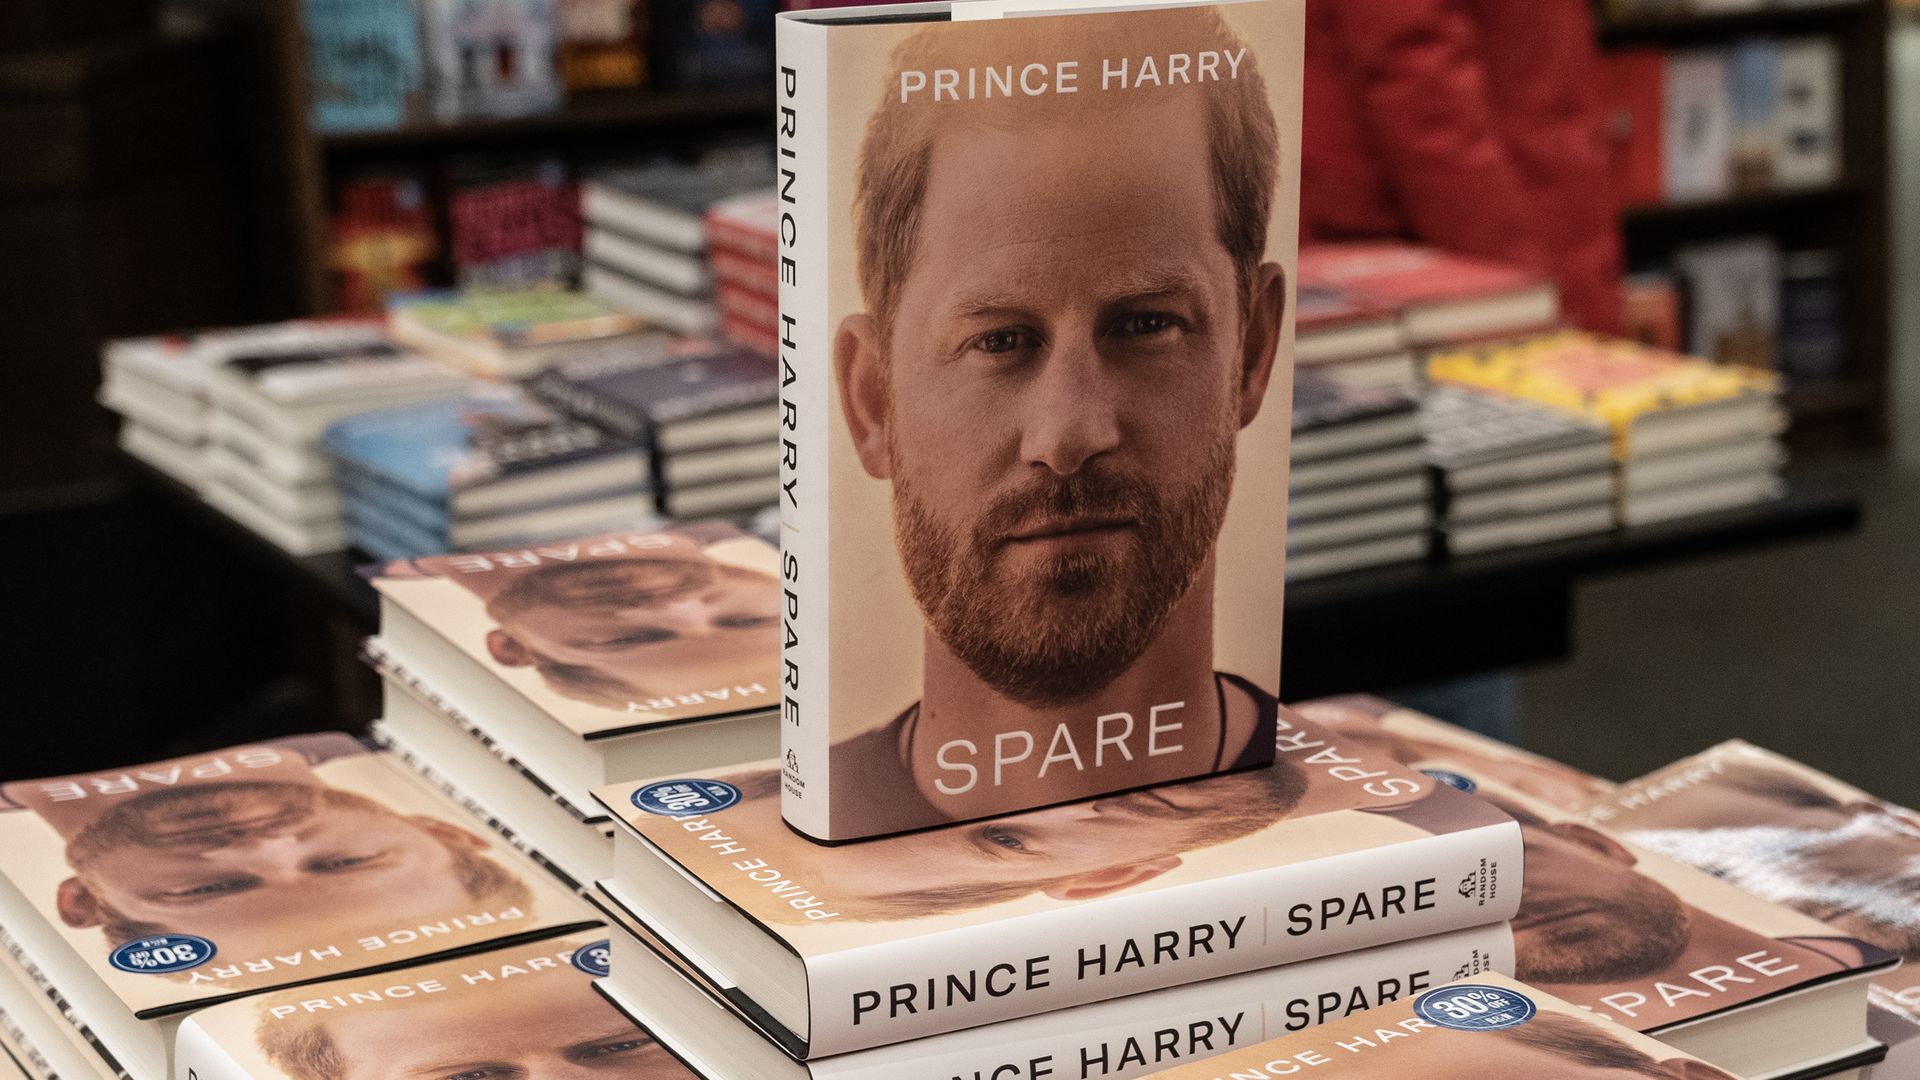 Copies of Prince Harry's new book, "Spare."